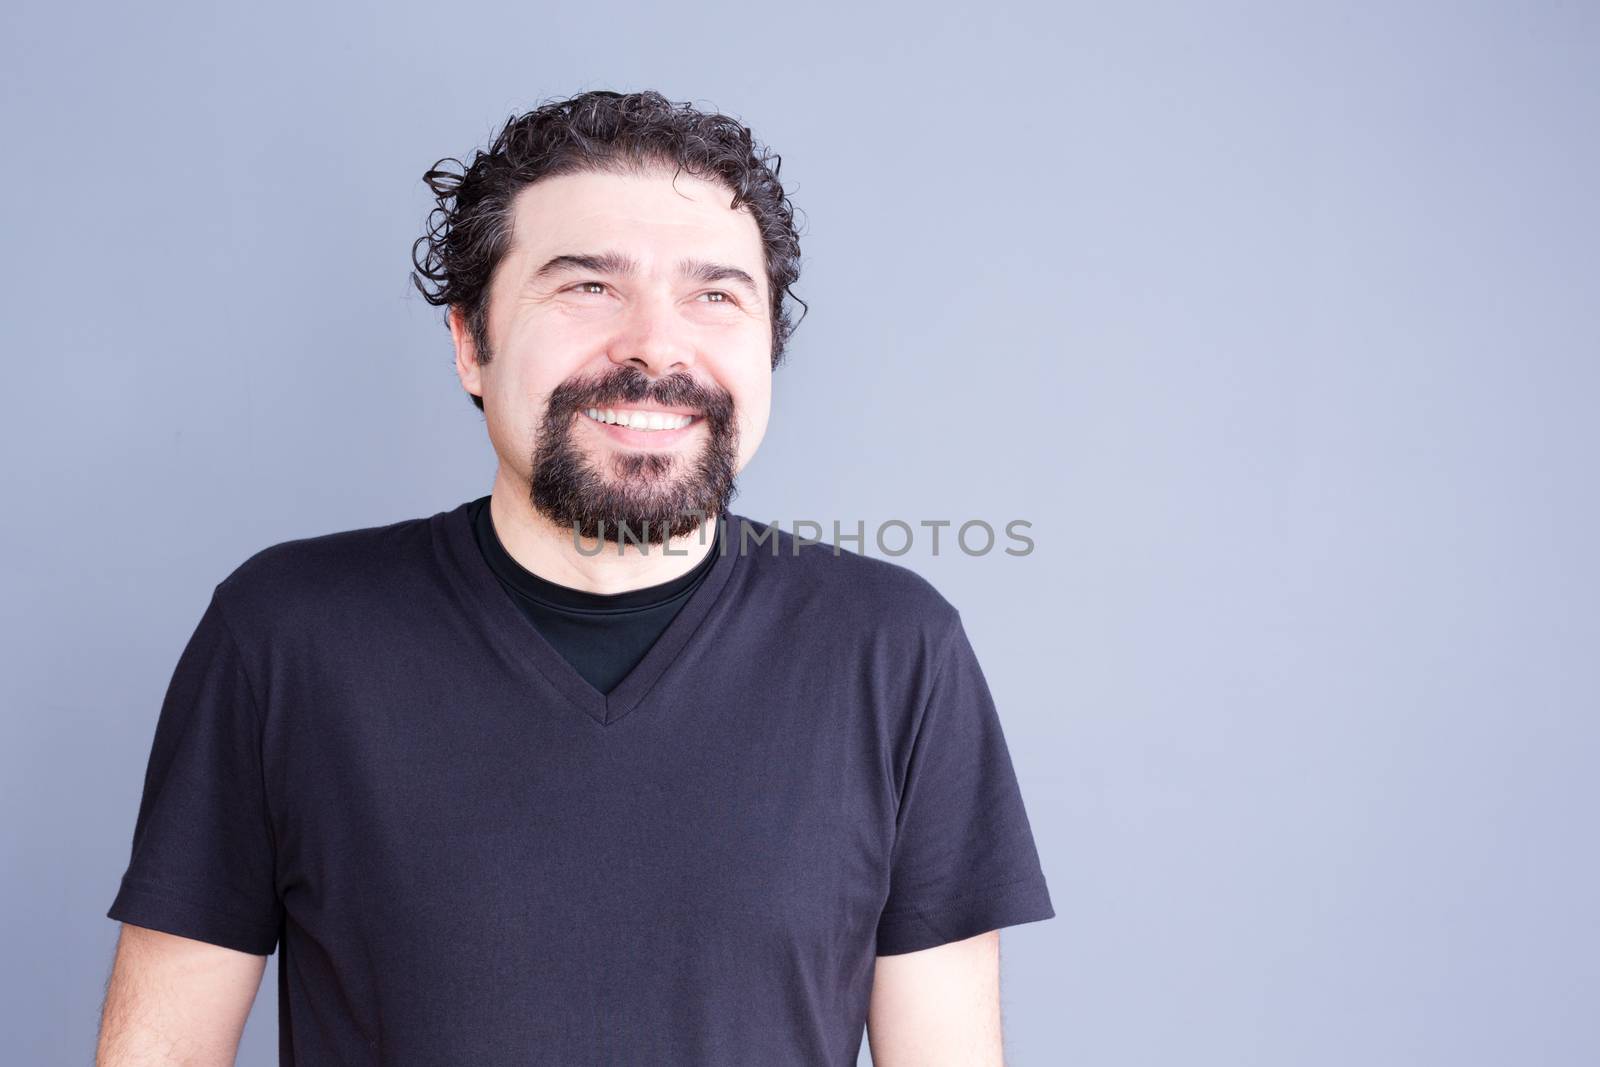 Waist Up Casual Portrait of Man with Beard and Curly Hair Wearing Dark T-Shirt Smiling and Laughing Joyfully in Studio with Gray Background and Copy Space